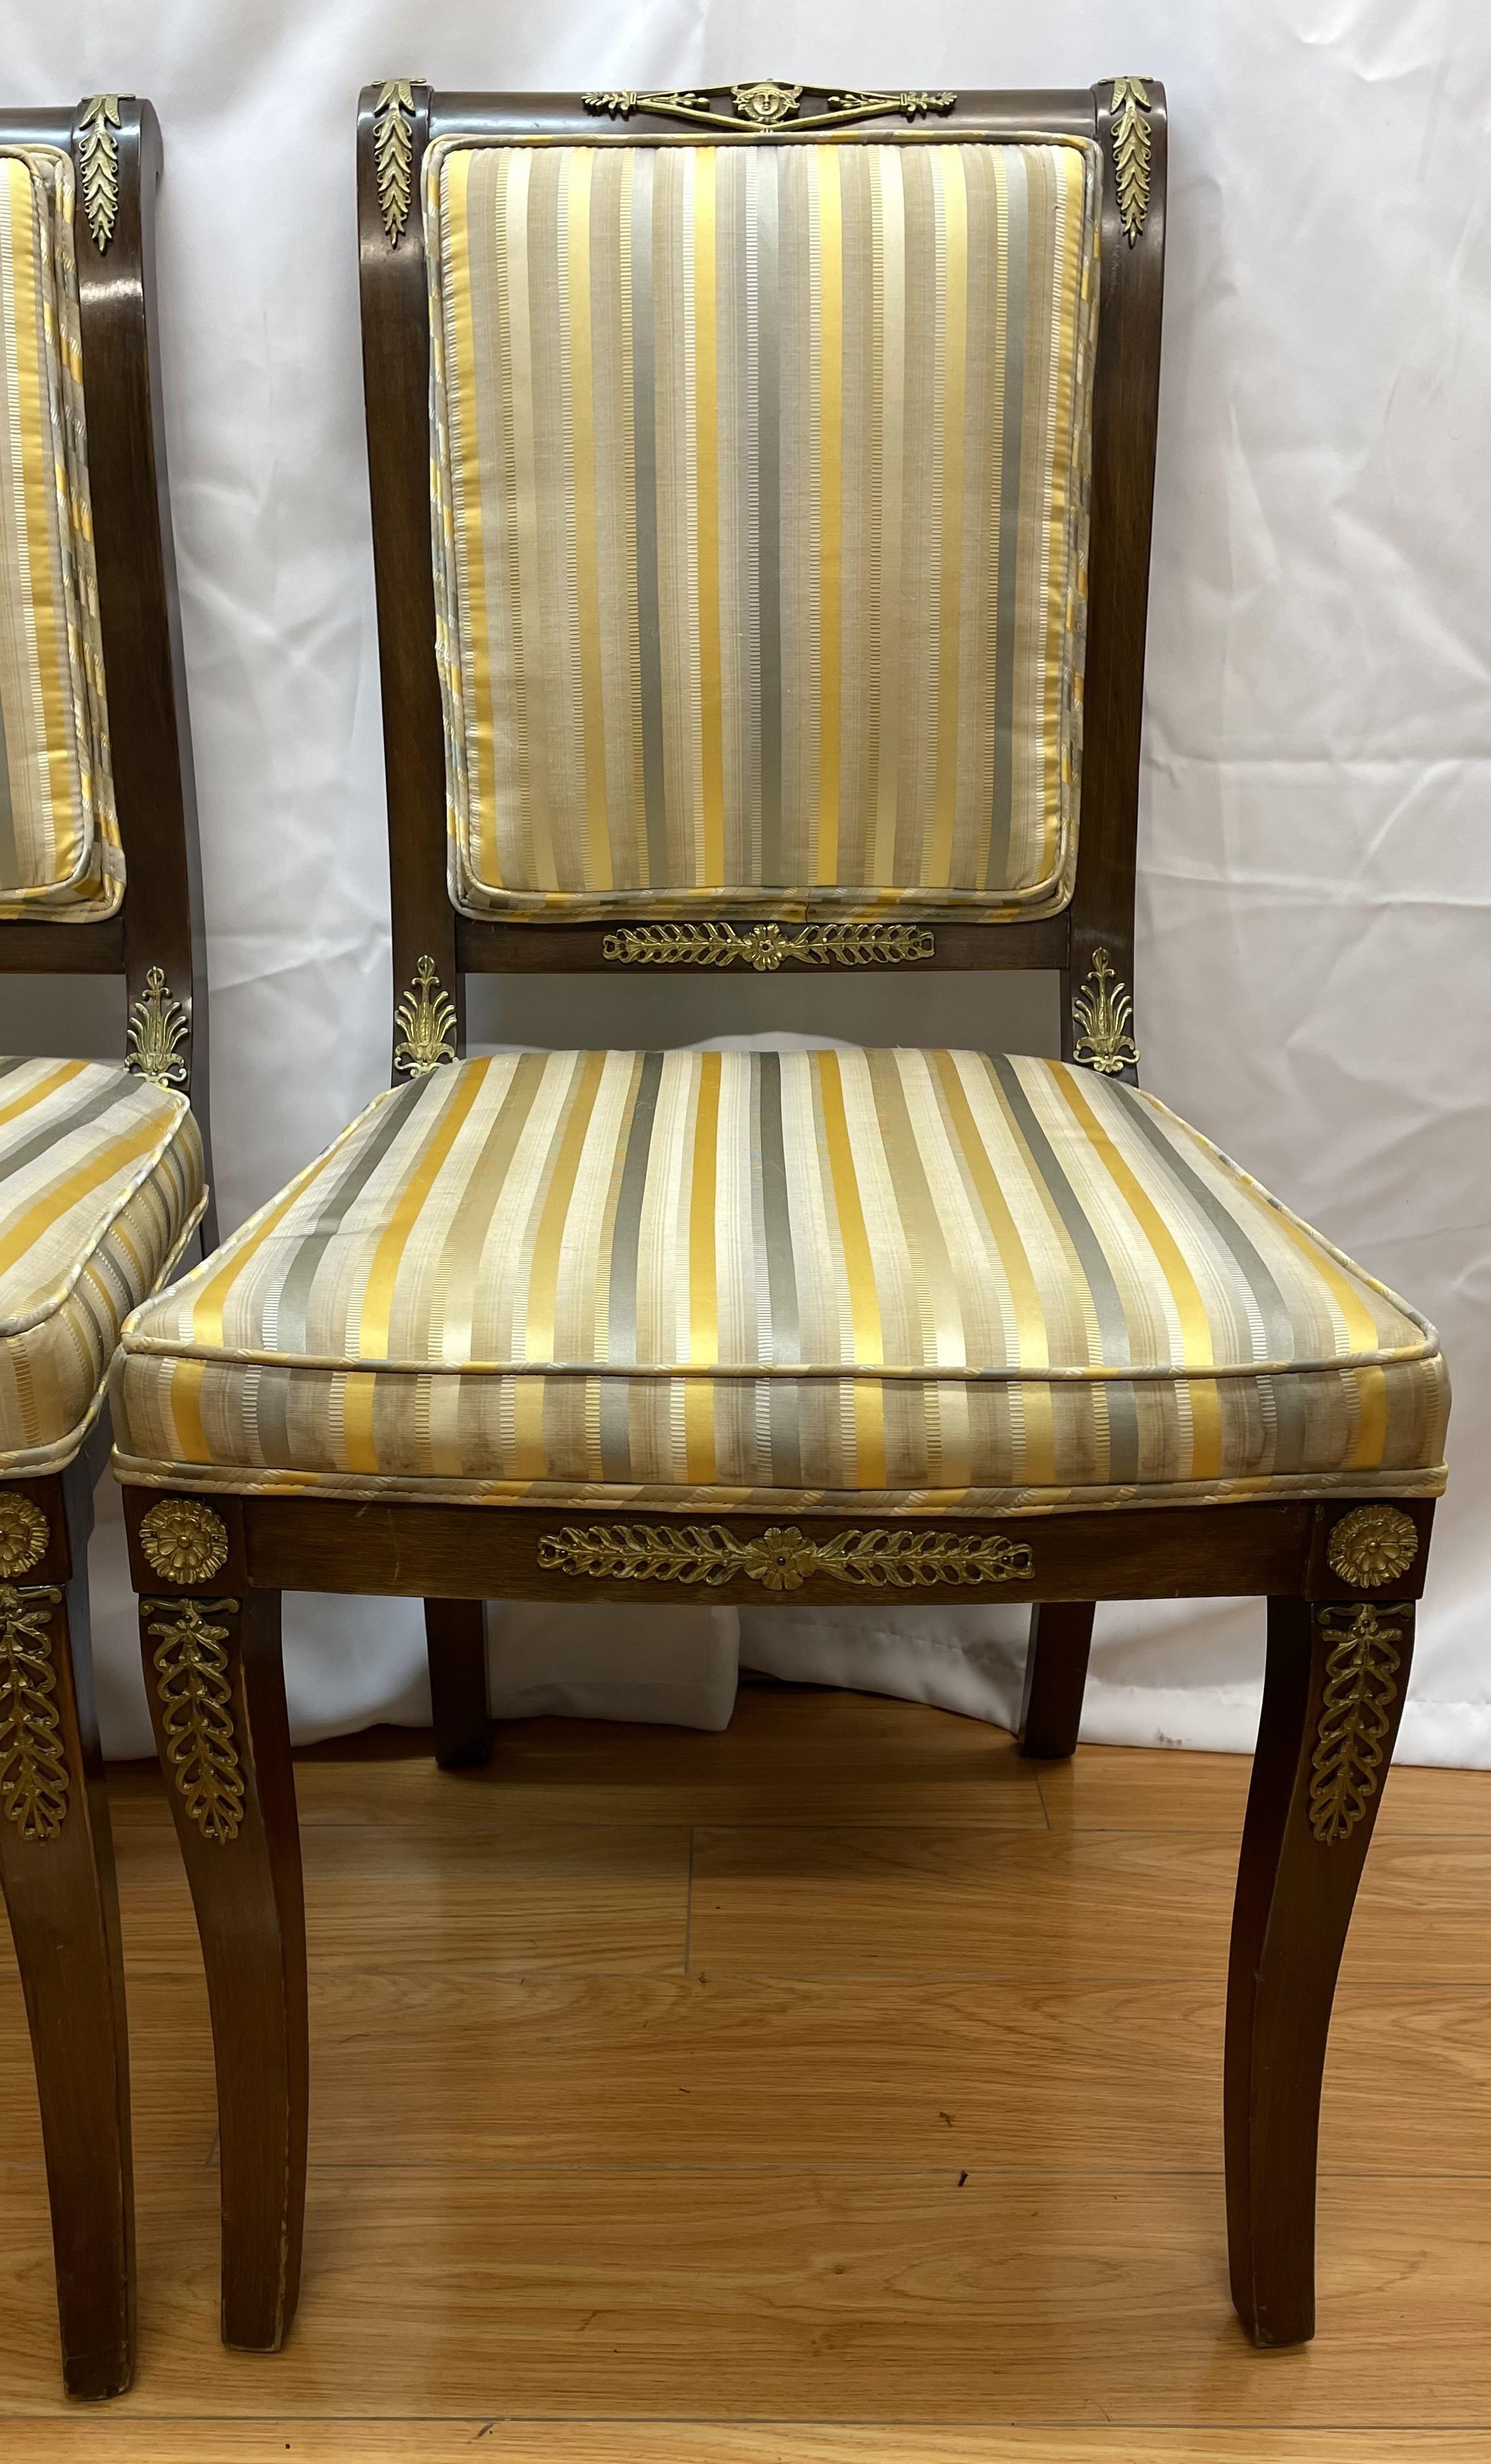 Pair of Napoleanic - style stripped side chairs with gilded ormolu mounts

Upholstered in silf fabrics 

20 x 20 x 38